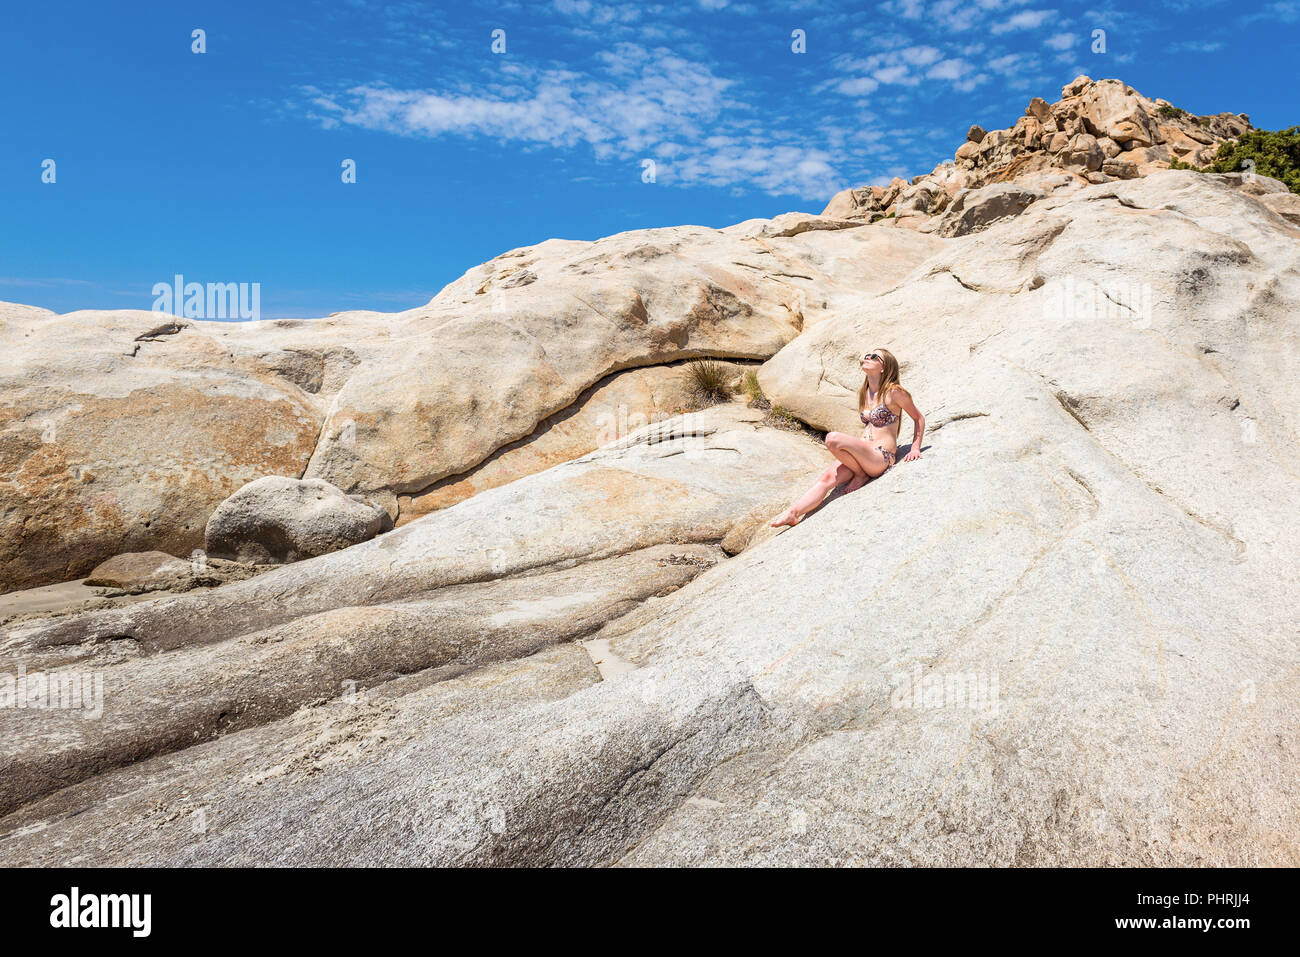 A beautiful young woman sitting on a rock in summer day. Naxos, Greece Stock Photo